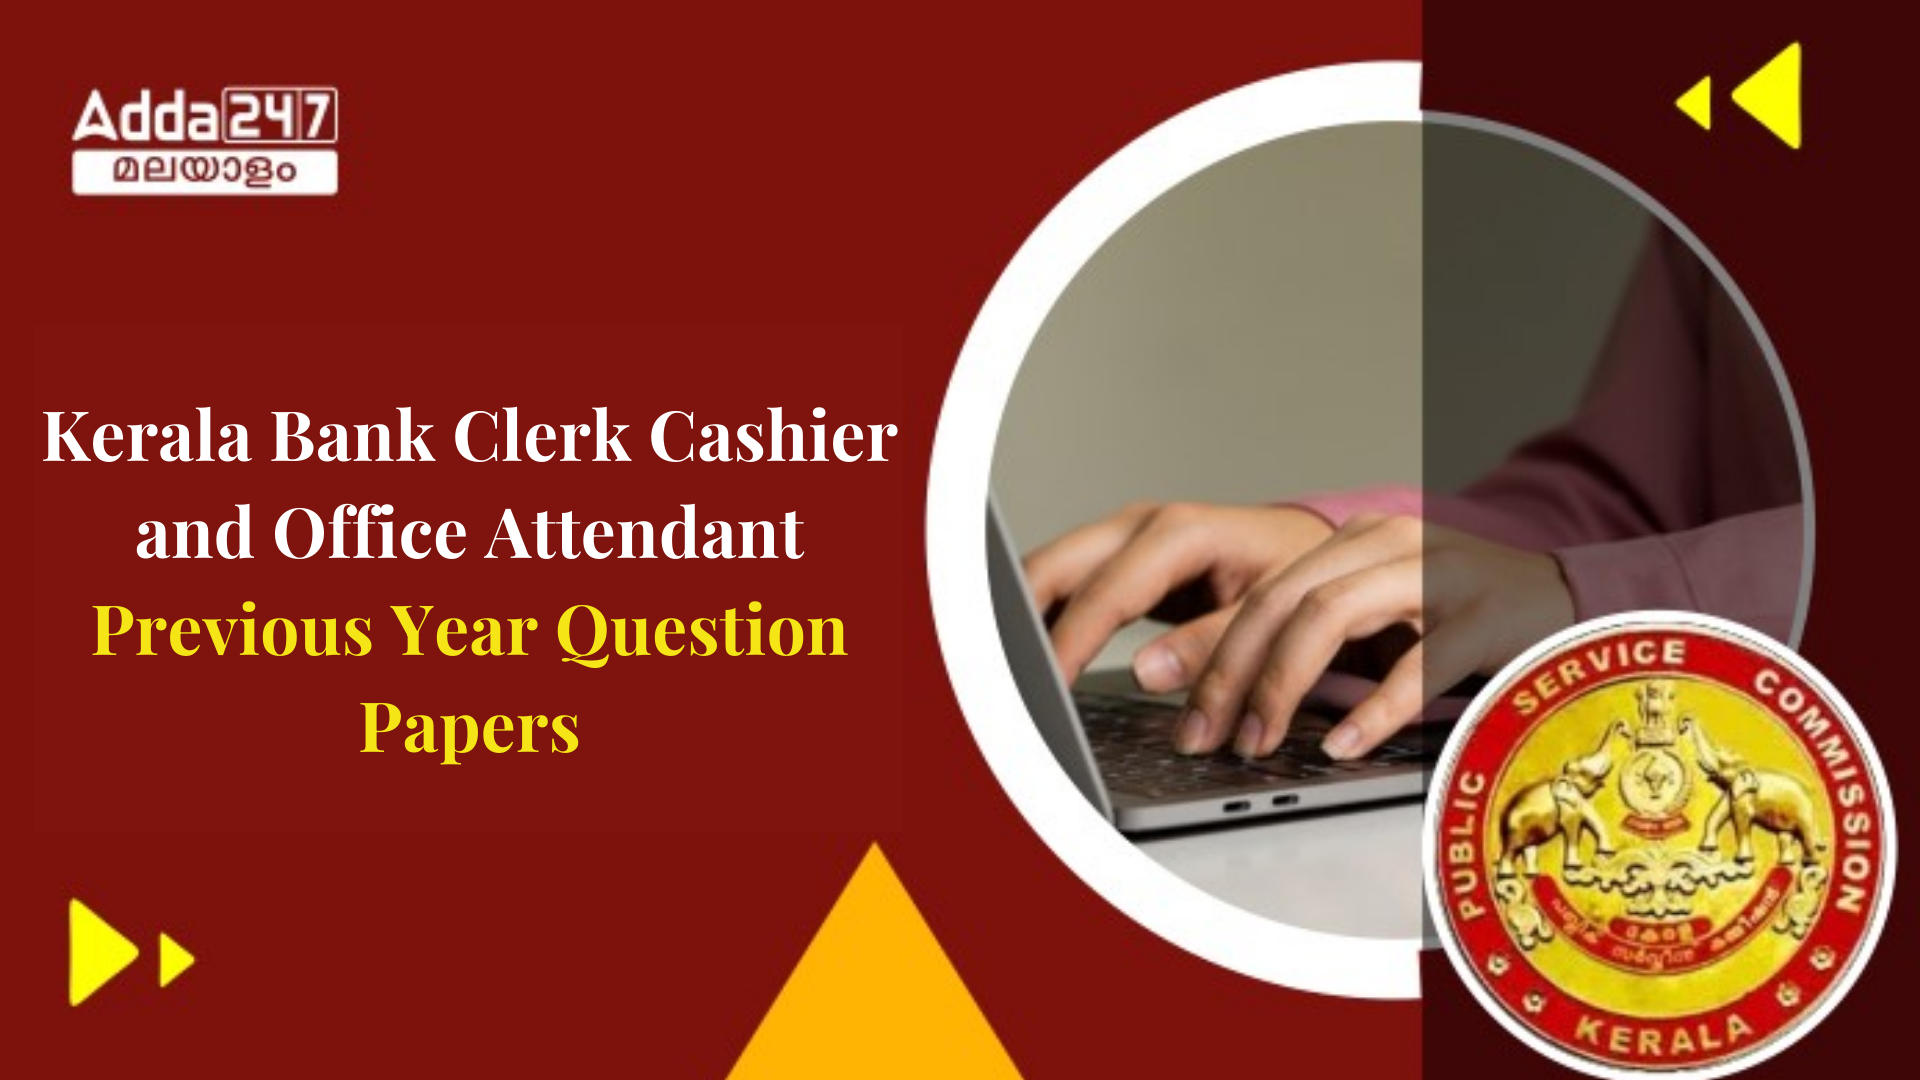 Kerala Bank Clerk Cashier and Office Attendant Question Papers